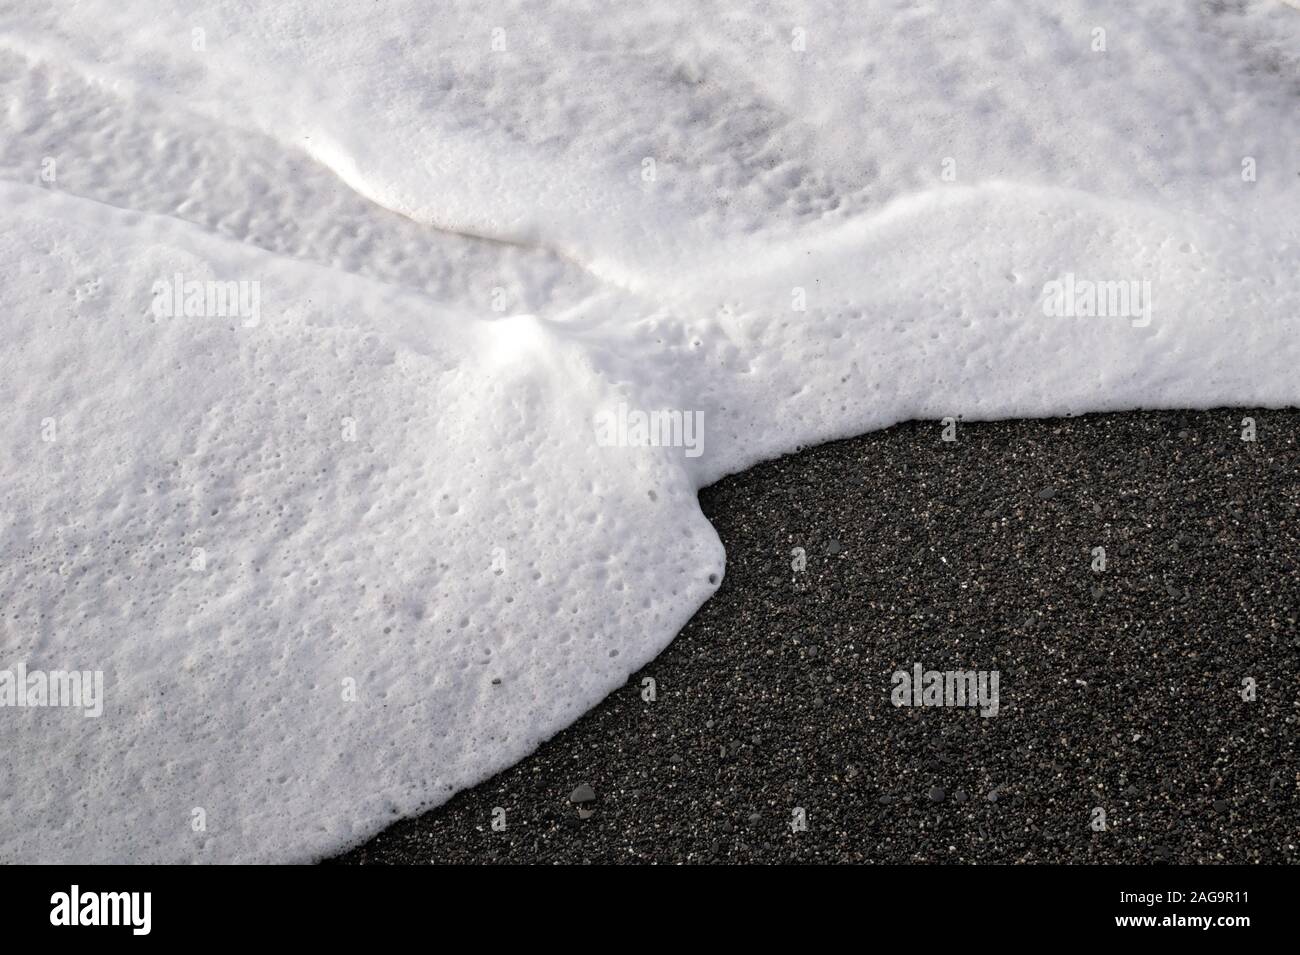 White sea foam on the beach gravel caused by rough sea and high wind Stock Photo